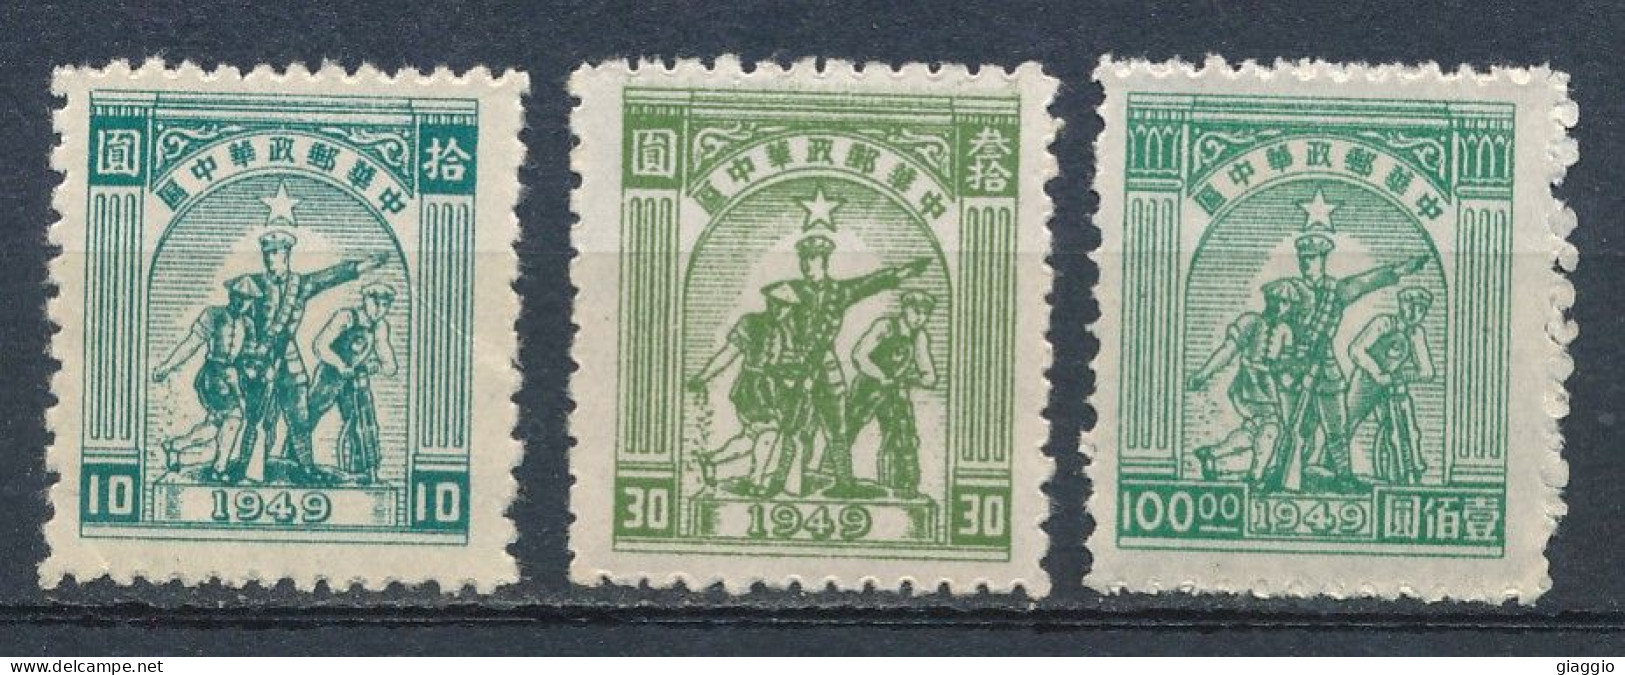 °°° LOT CINA CHINA CENTRALE - Y&T N°65/67/74 - 1949 °°° - Chine Centrale 1948-49